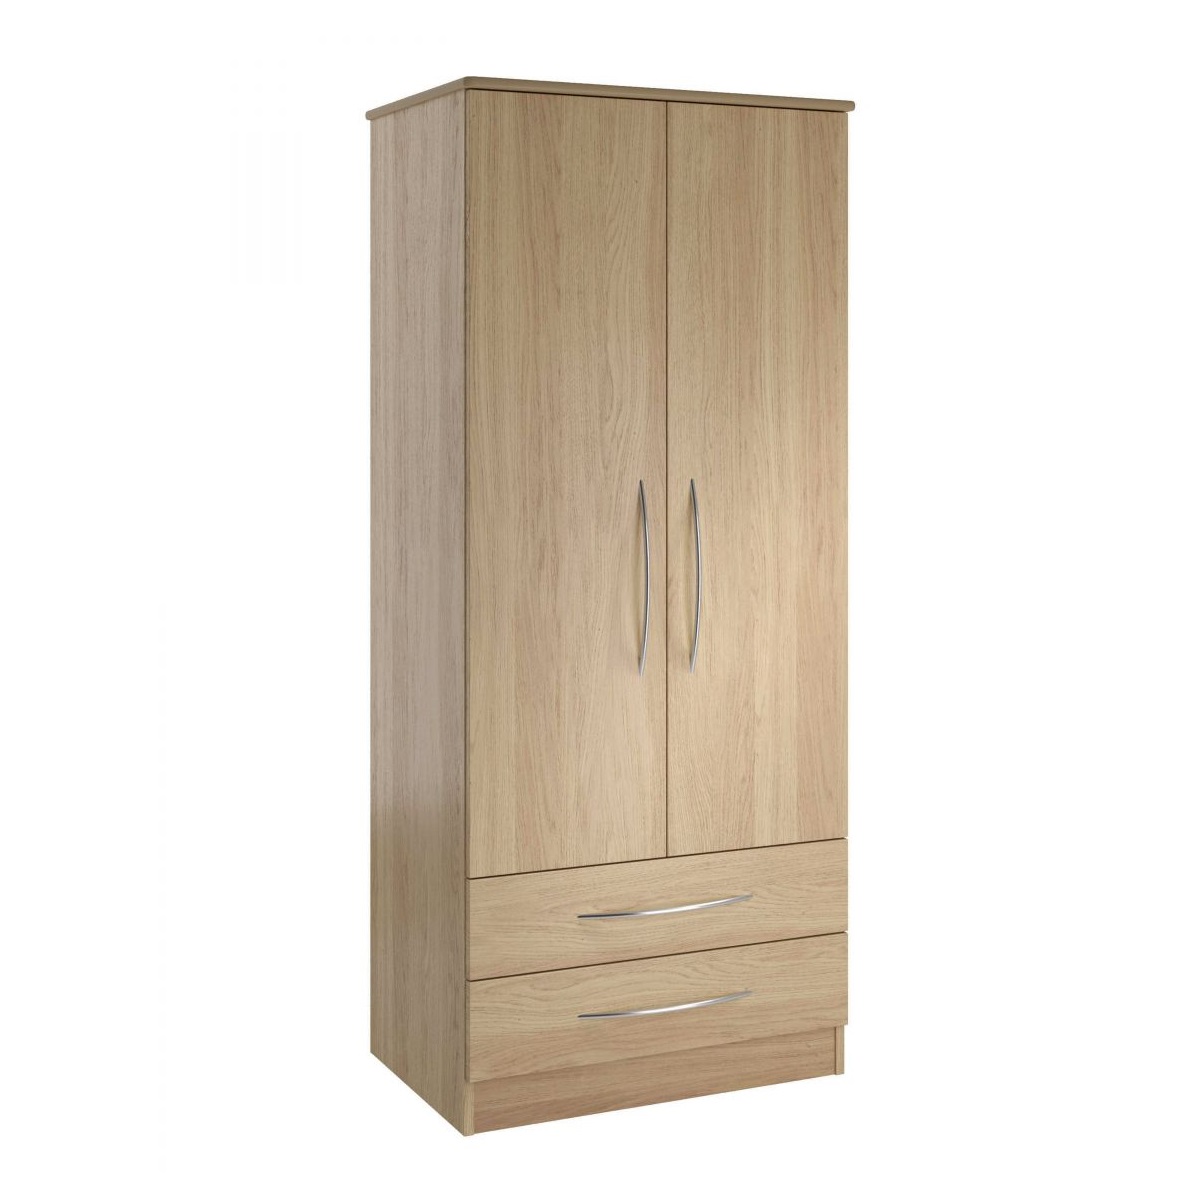 Coventry Range Gents Robe - Double Door and Two Drawers - Care Home ...